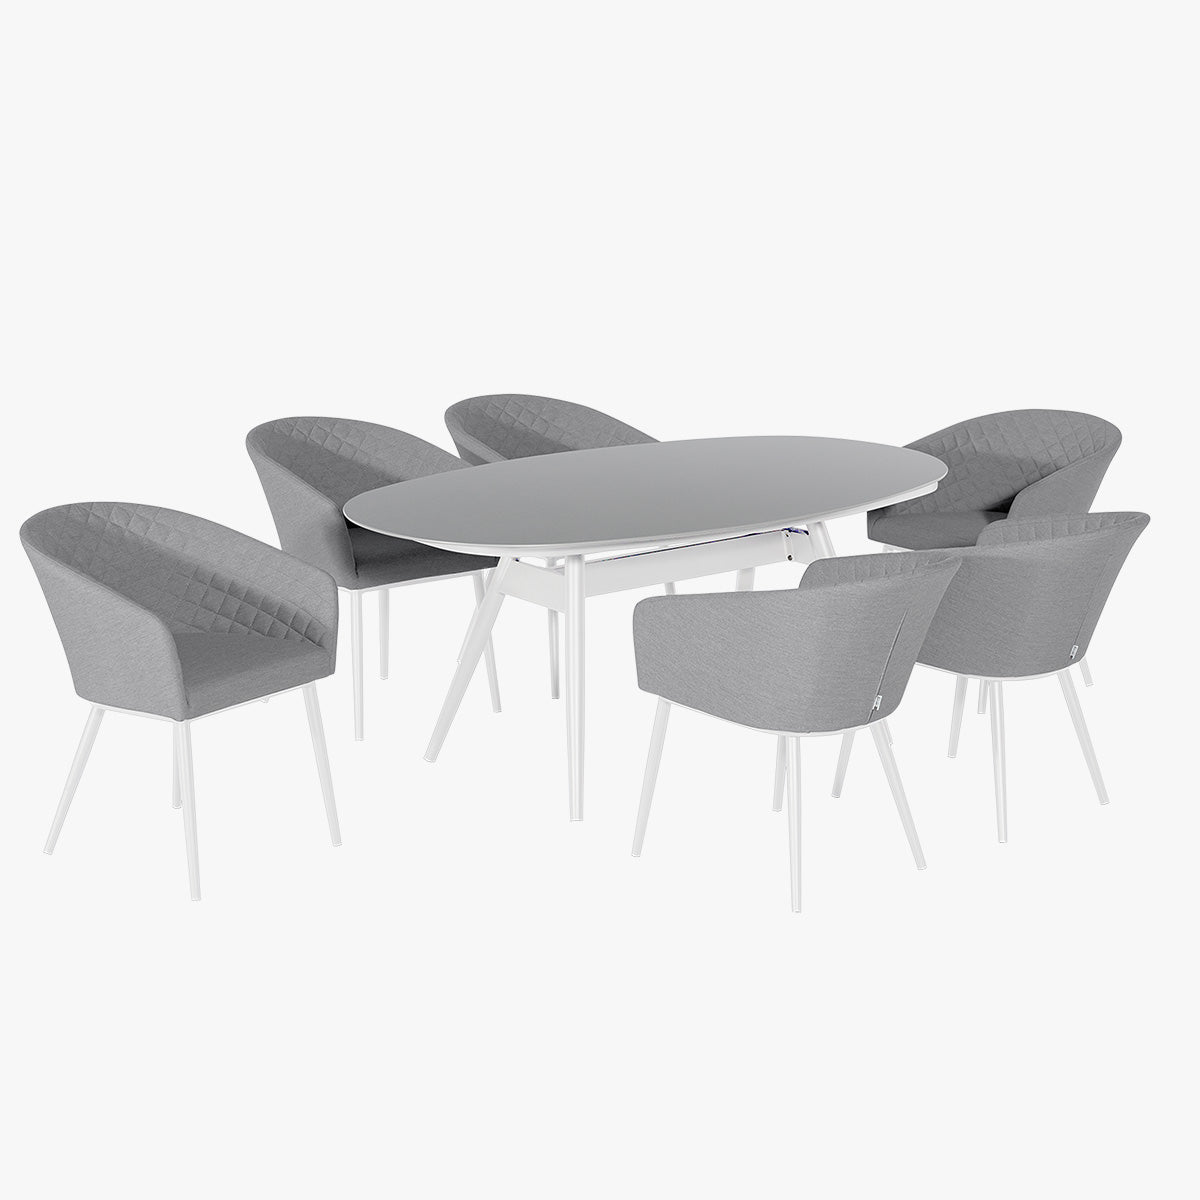 Outdoor Fabric Ambition 6 Seat Oval Dining Set